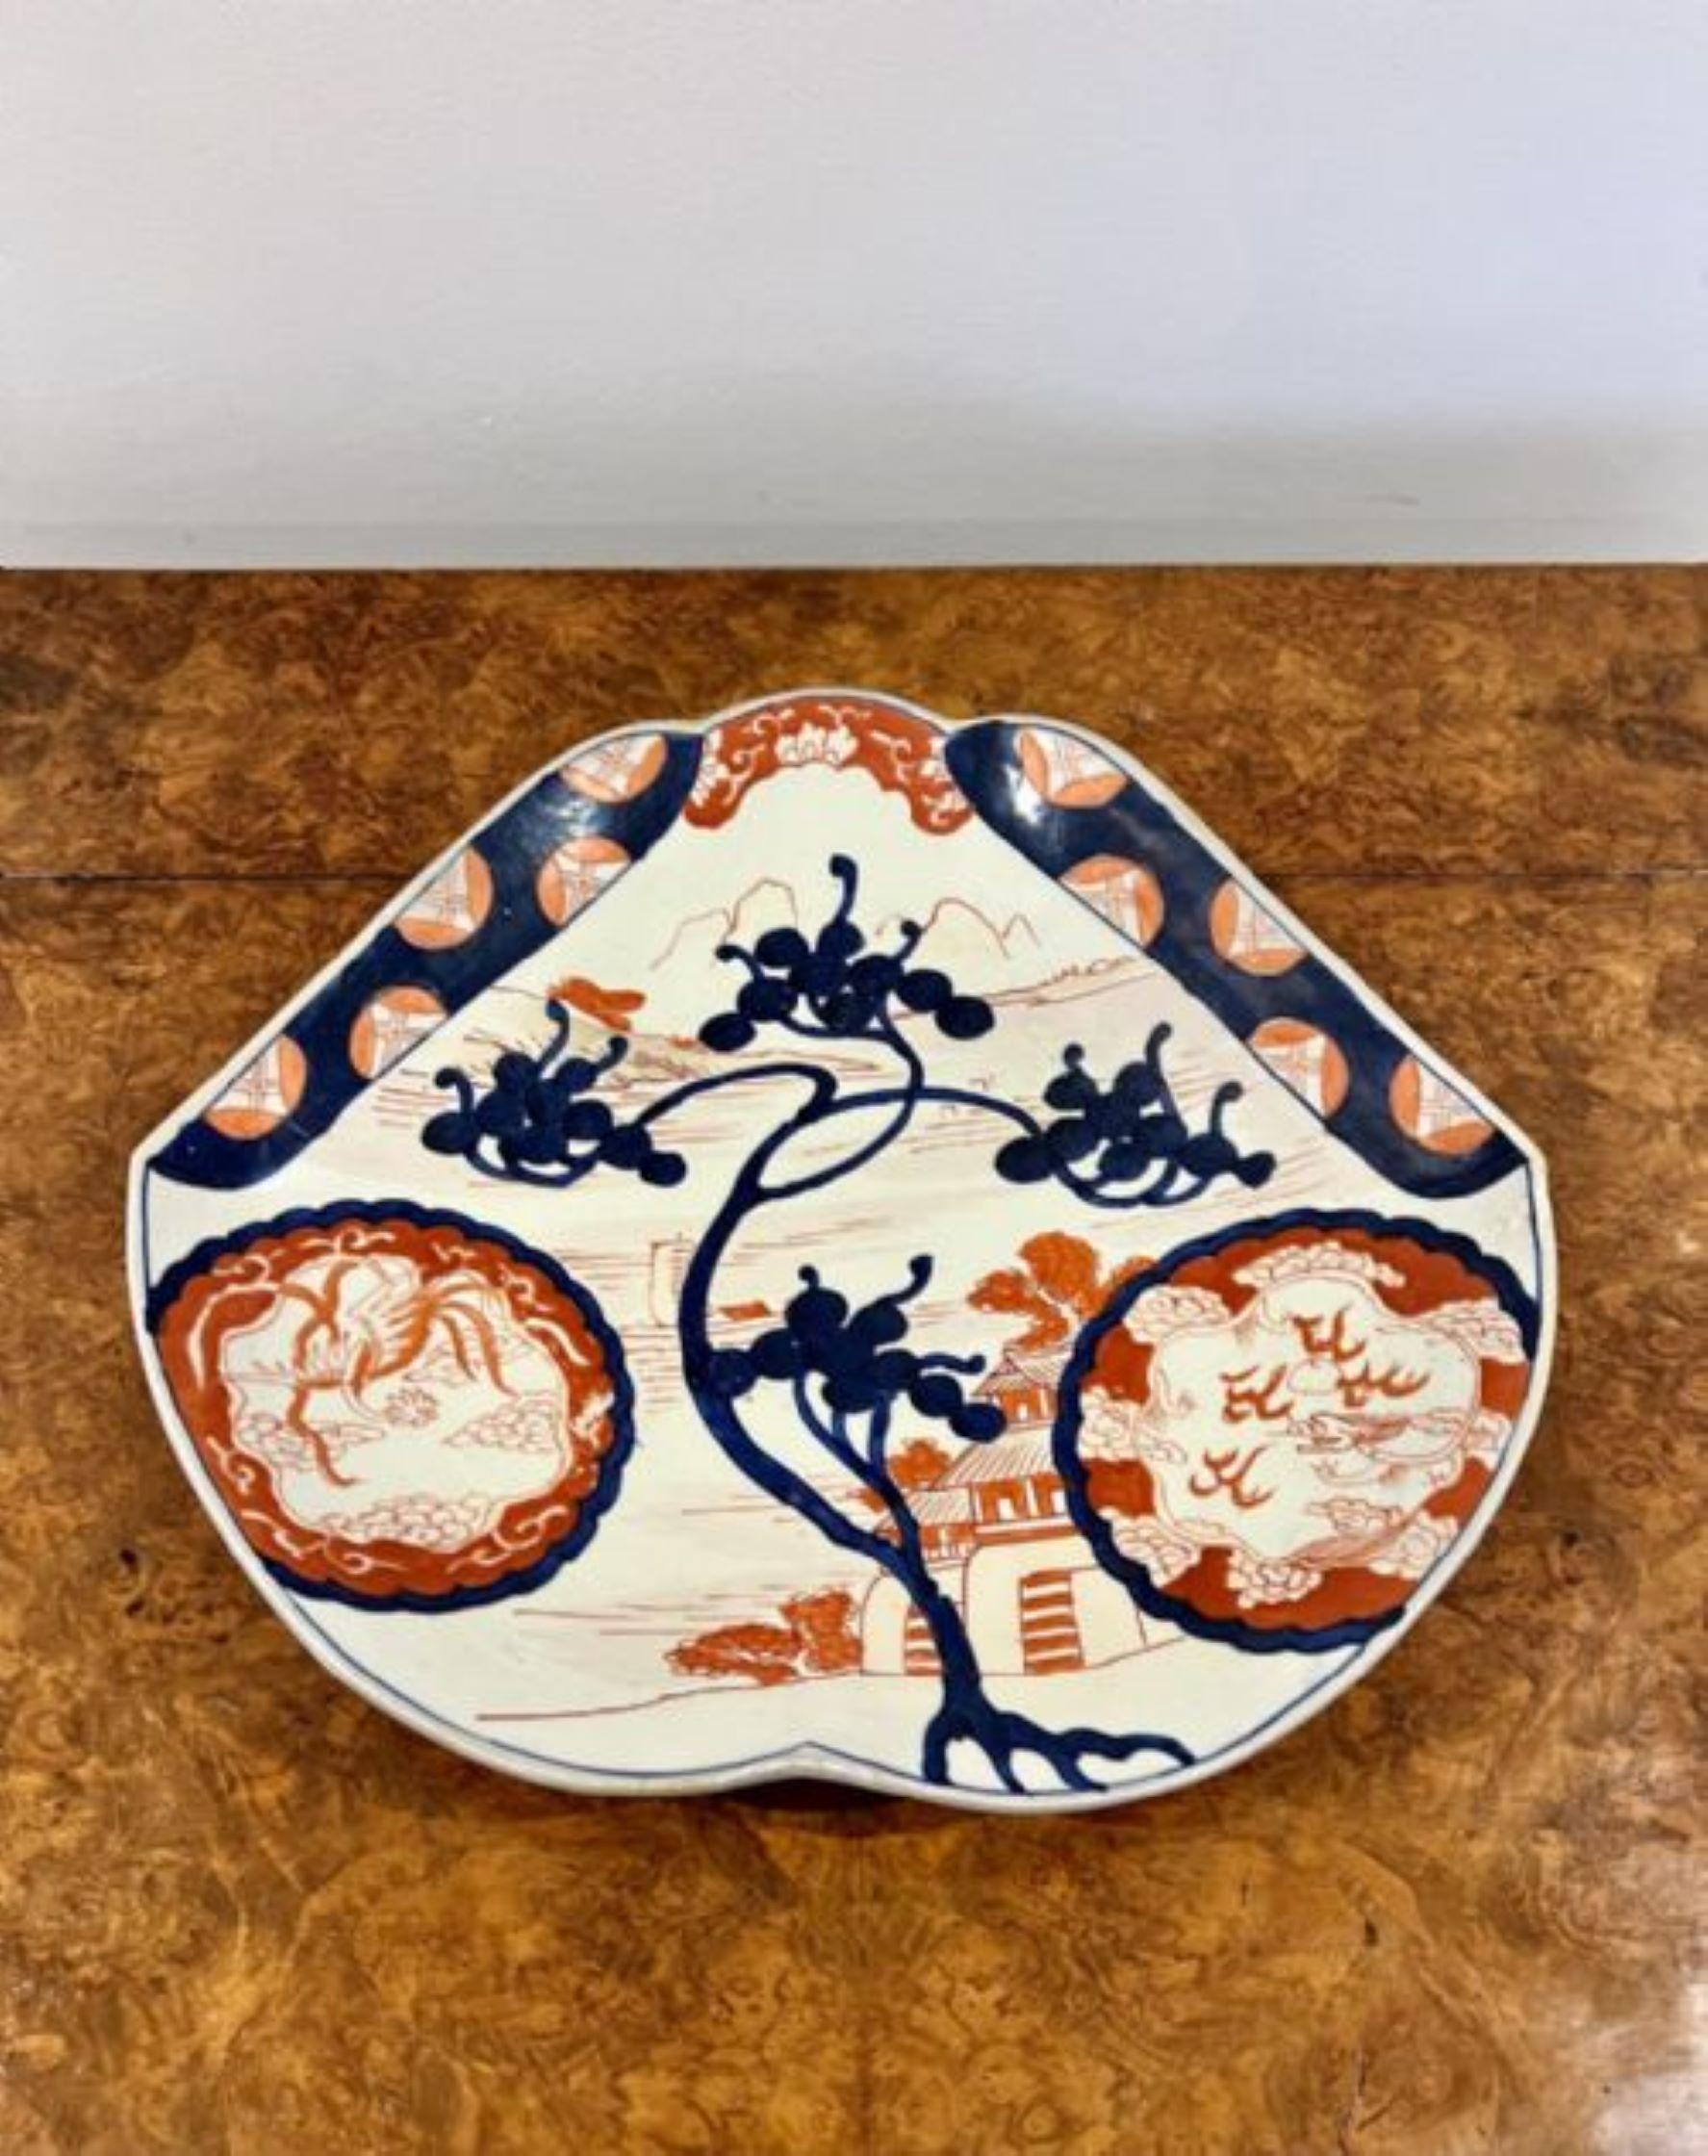 Unusual shaped antique Japanese Imari plate having an unusual shaped antique Japanese Imari charger having a scalloped shaped edge with hand painted detail with leaves, trees and a house hand painted in blue, red and white colours 